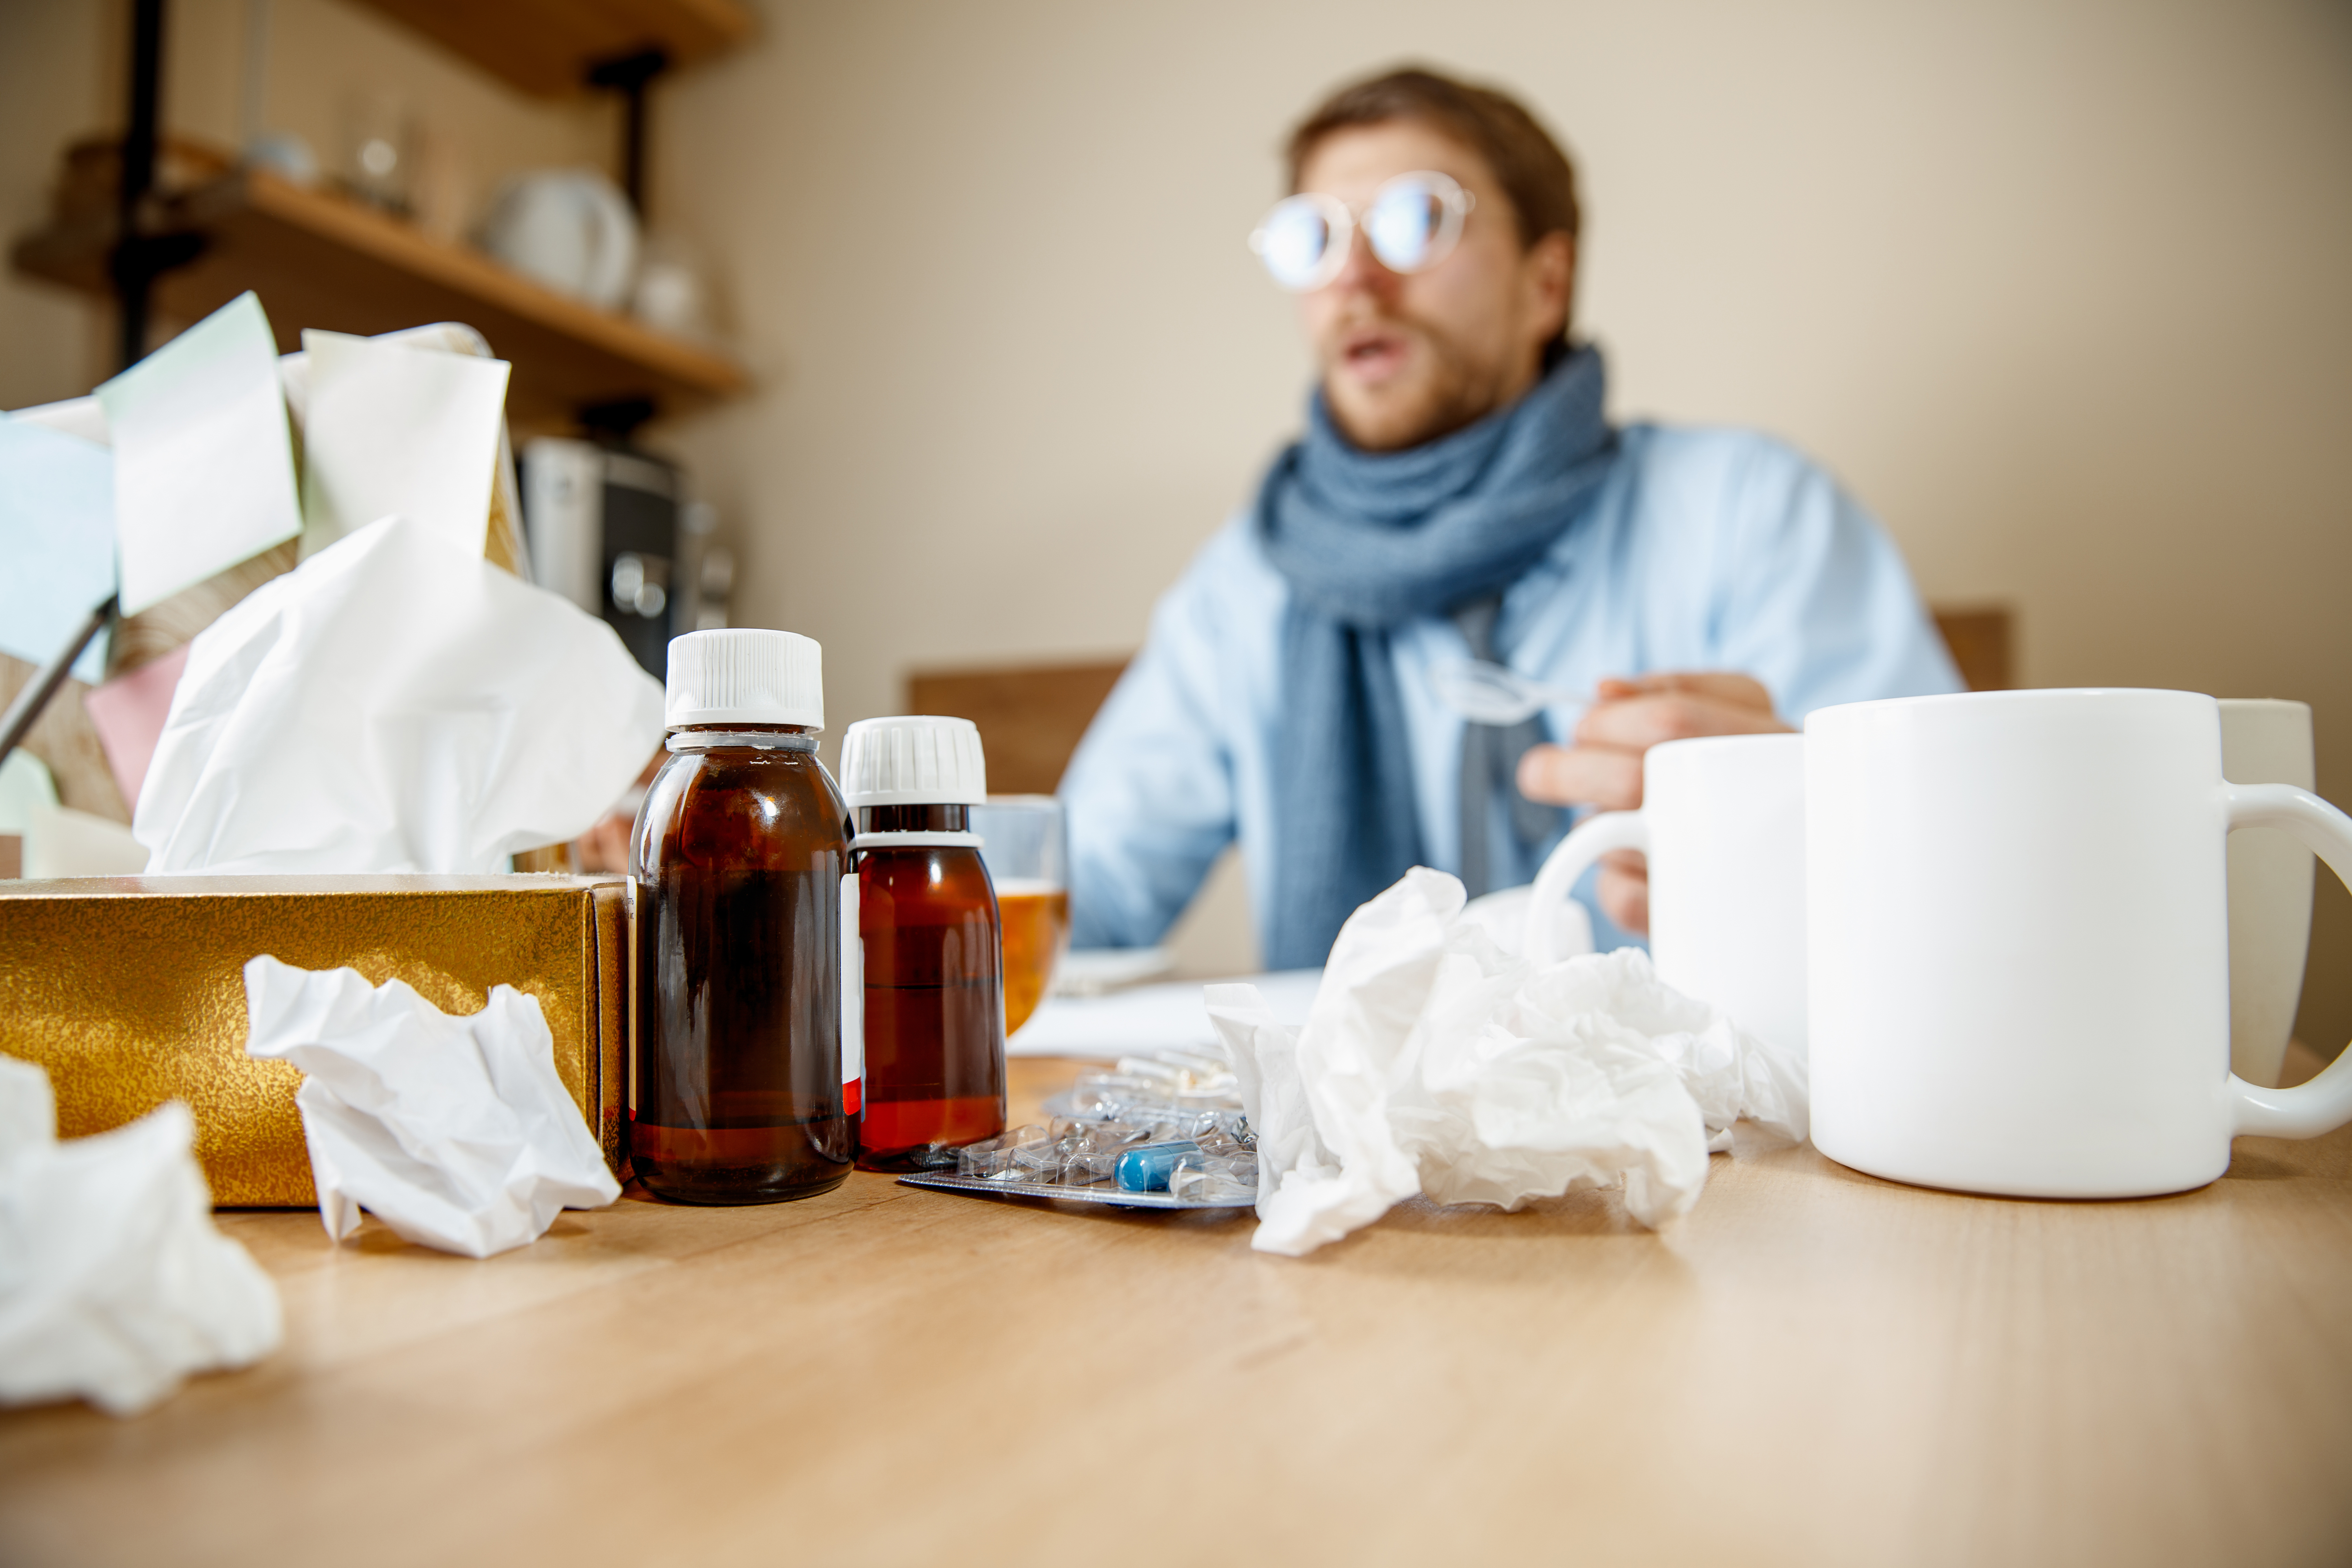 Common Cold: First Symptoms, and How to Manage Them